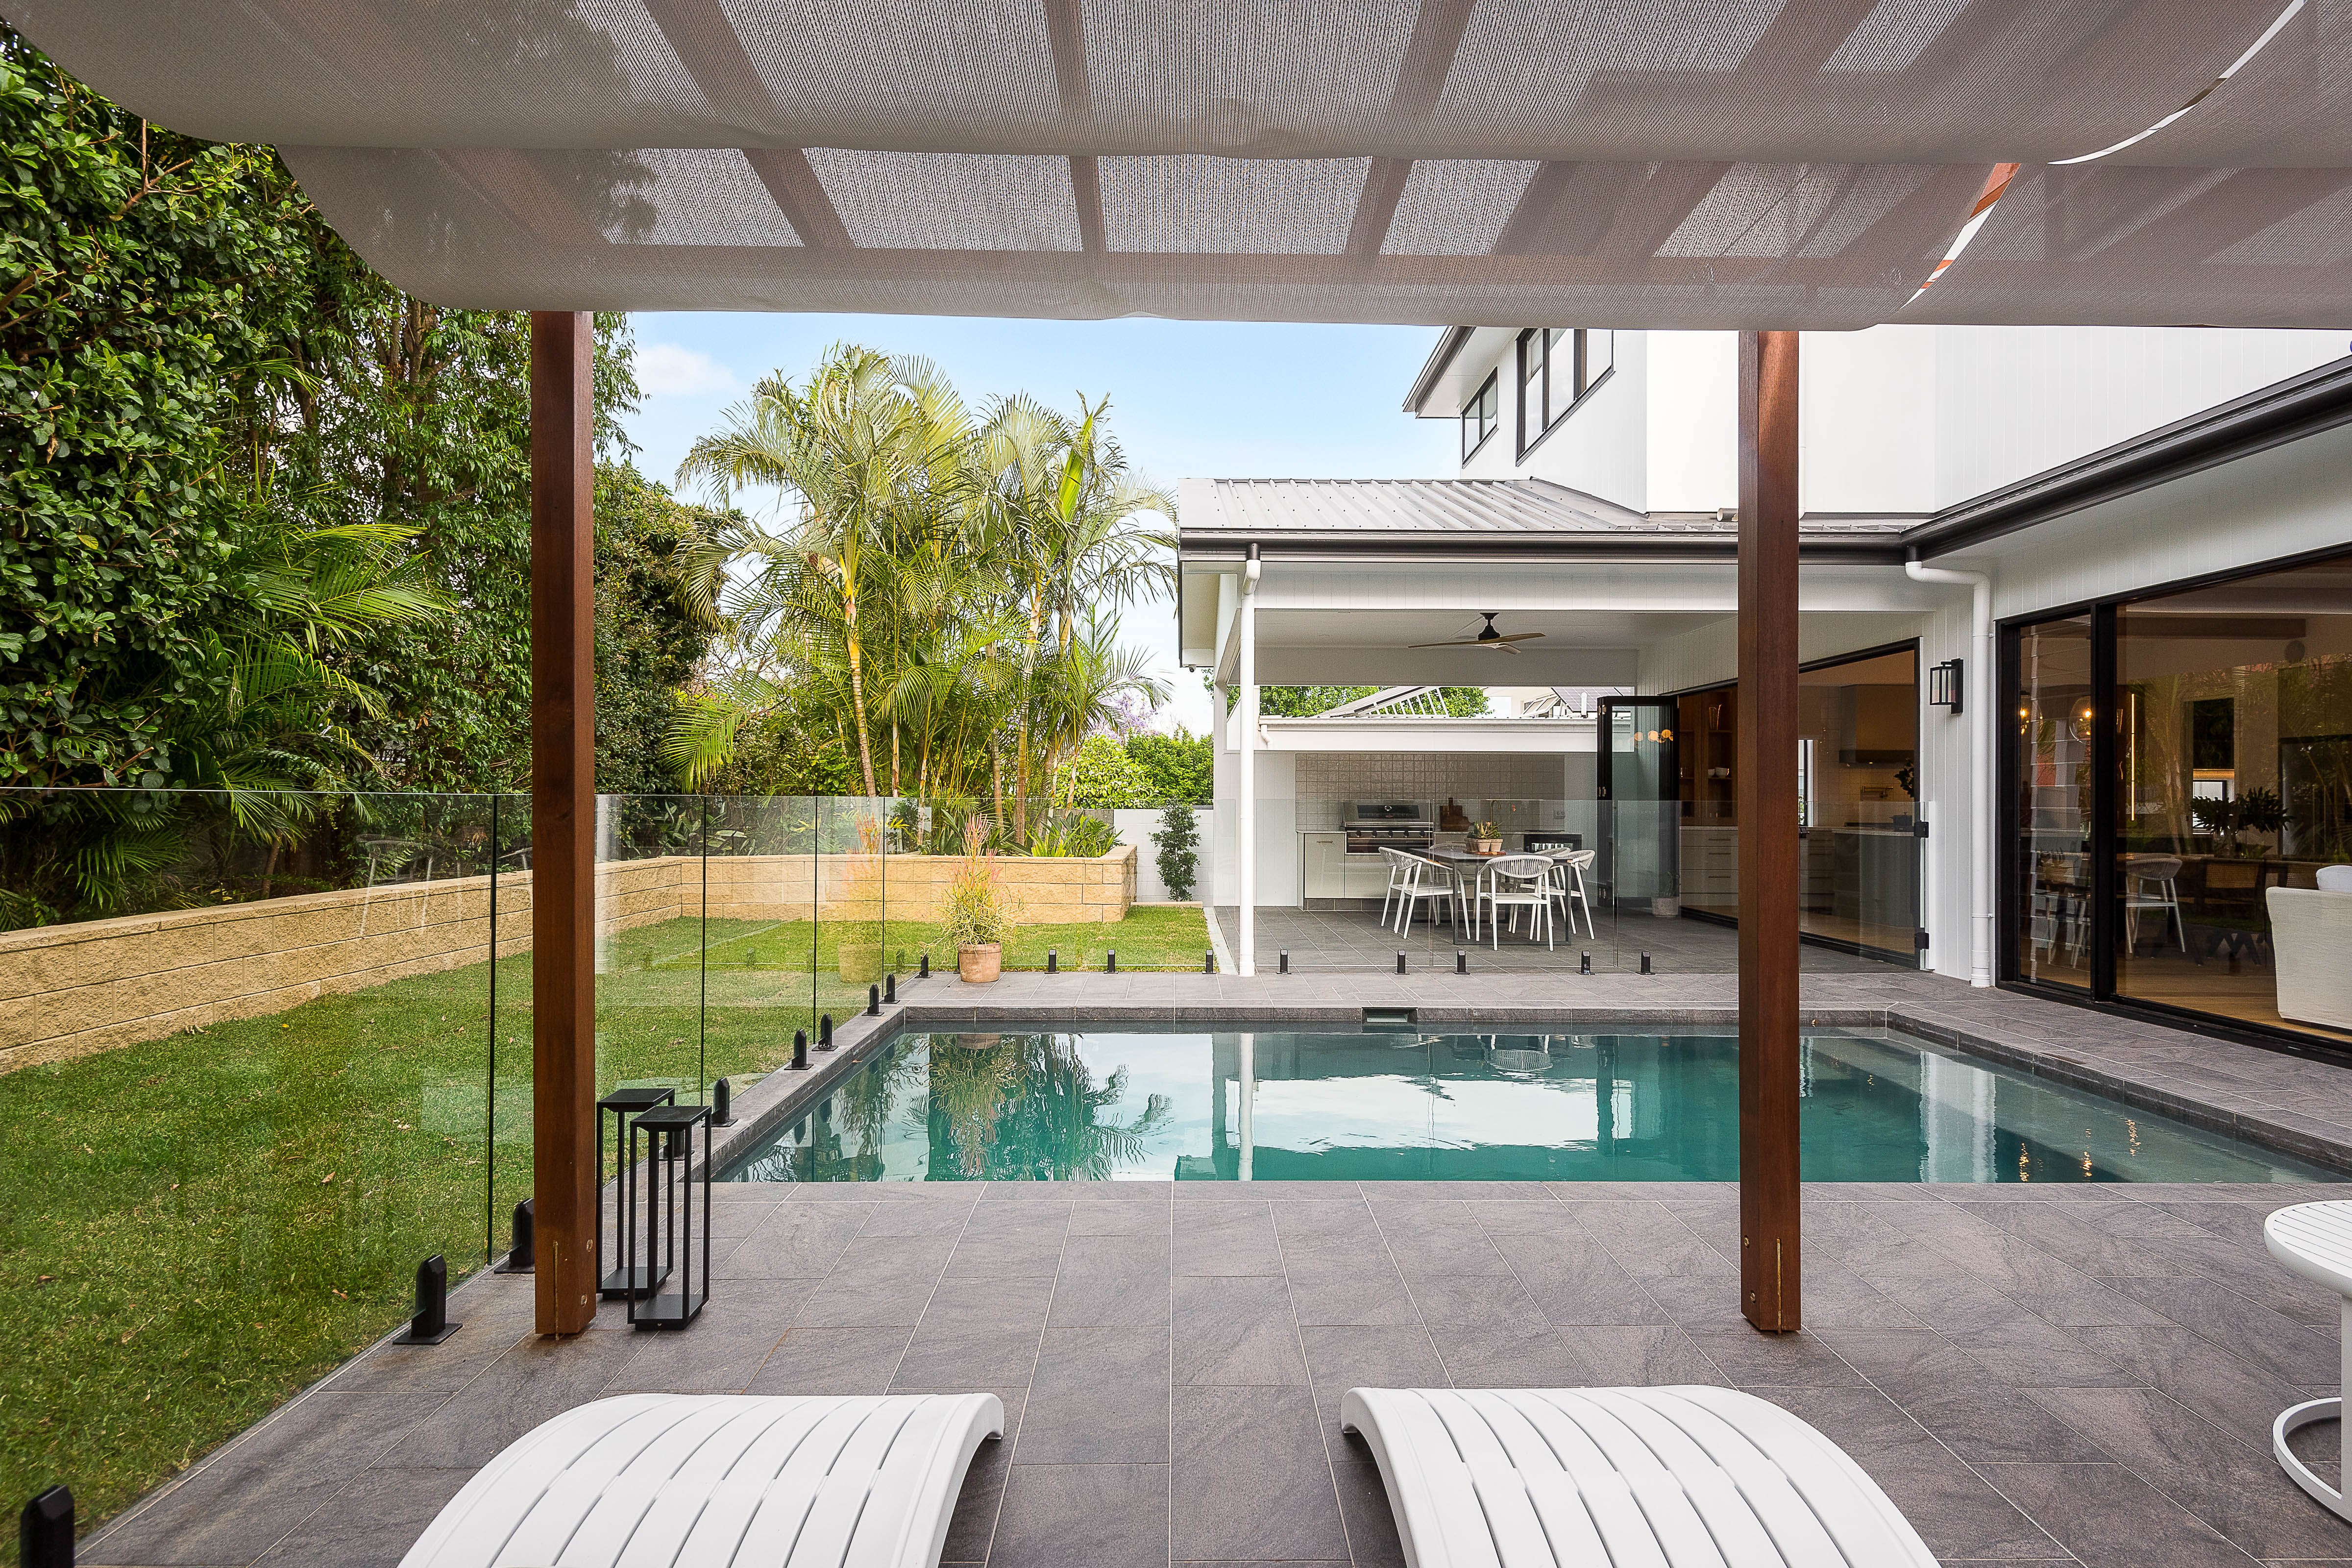 54 Union Street, pool and outdoor area